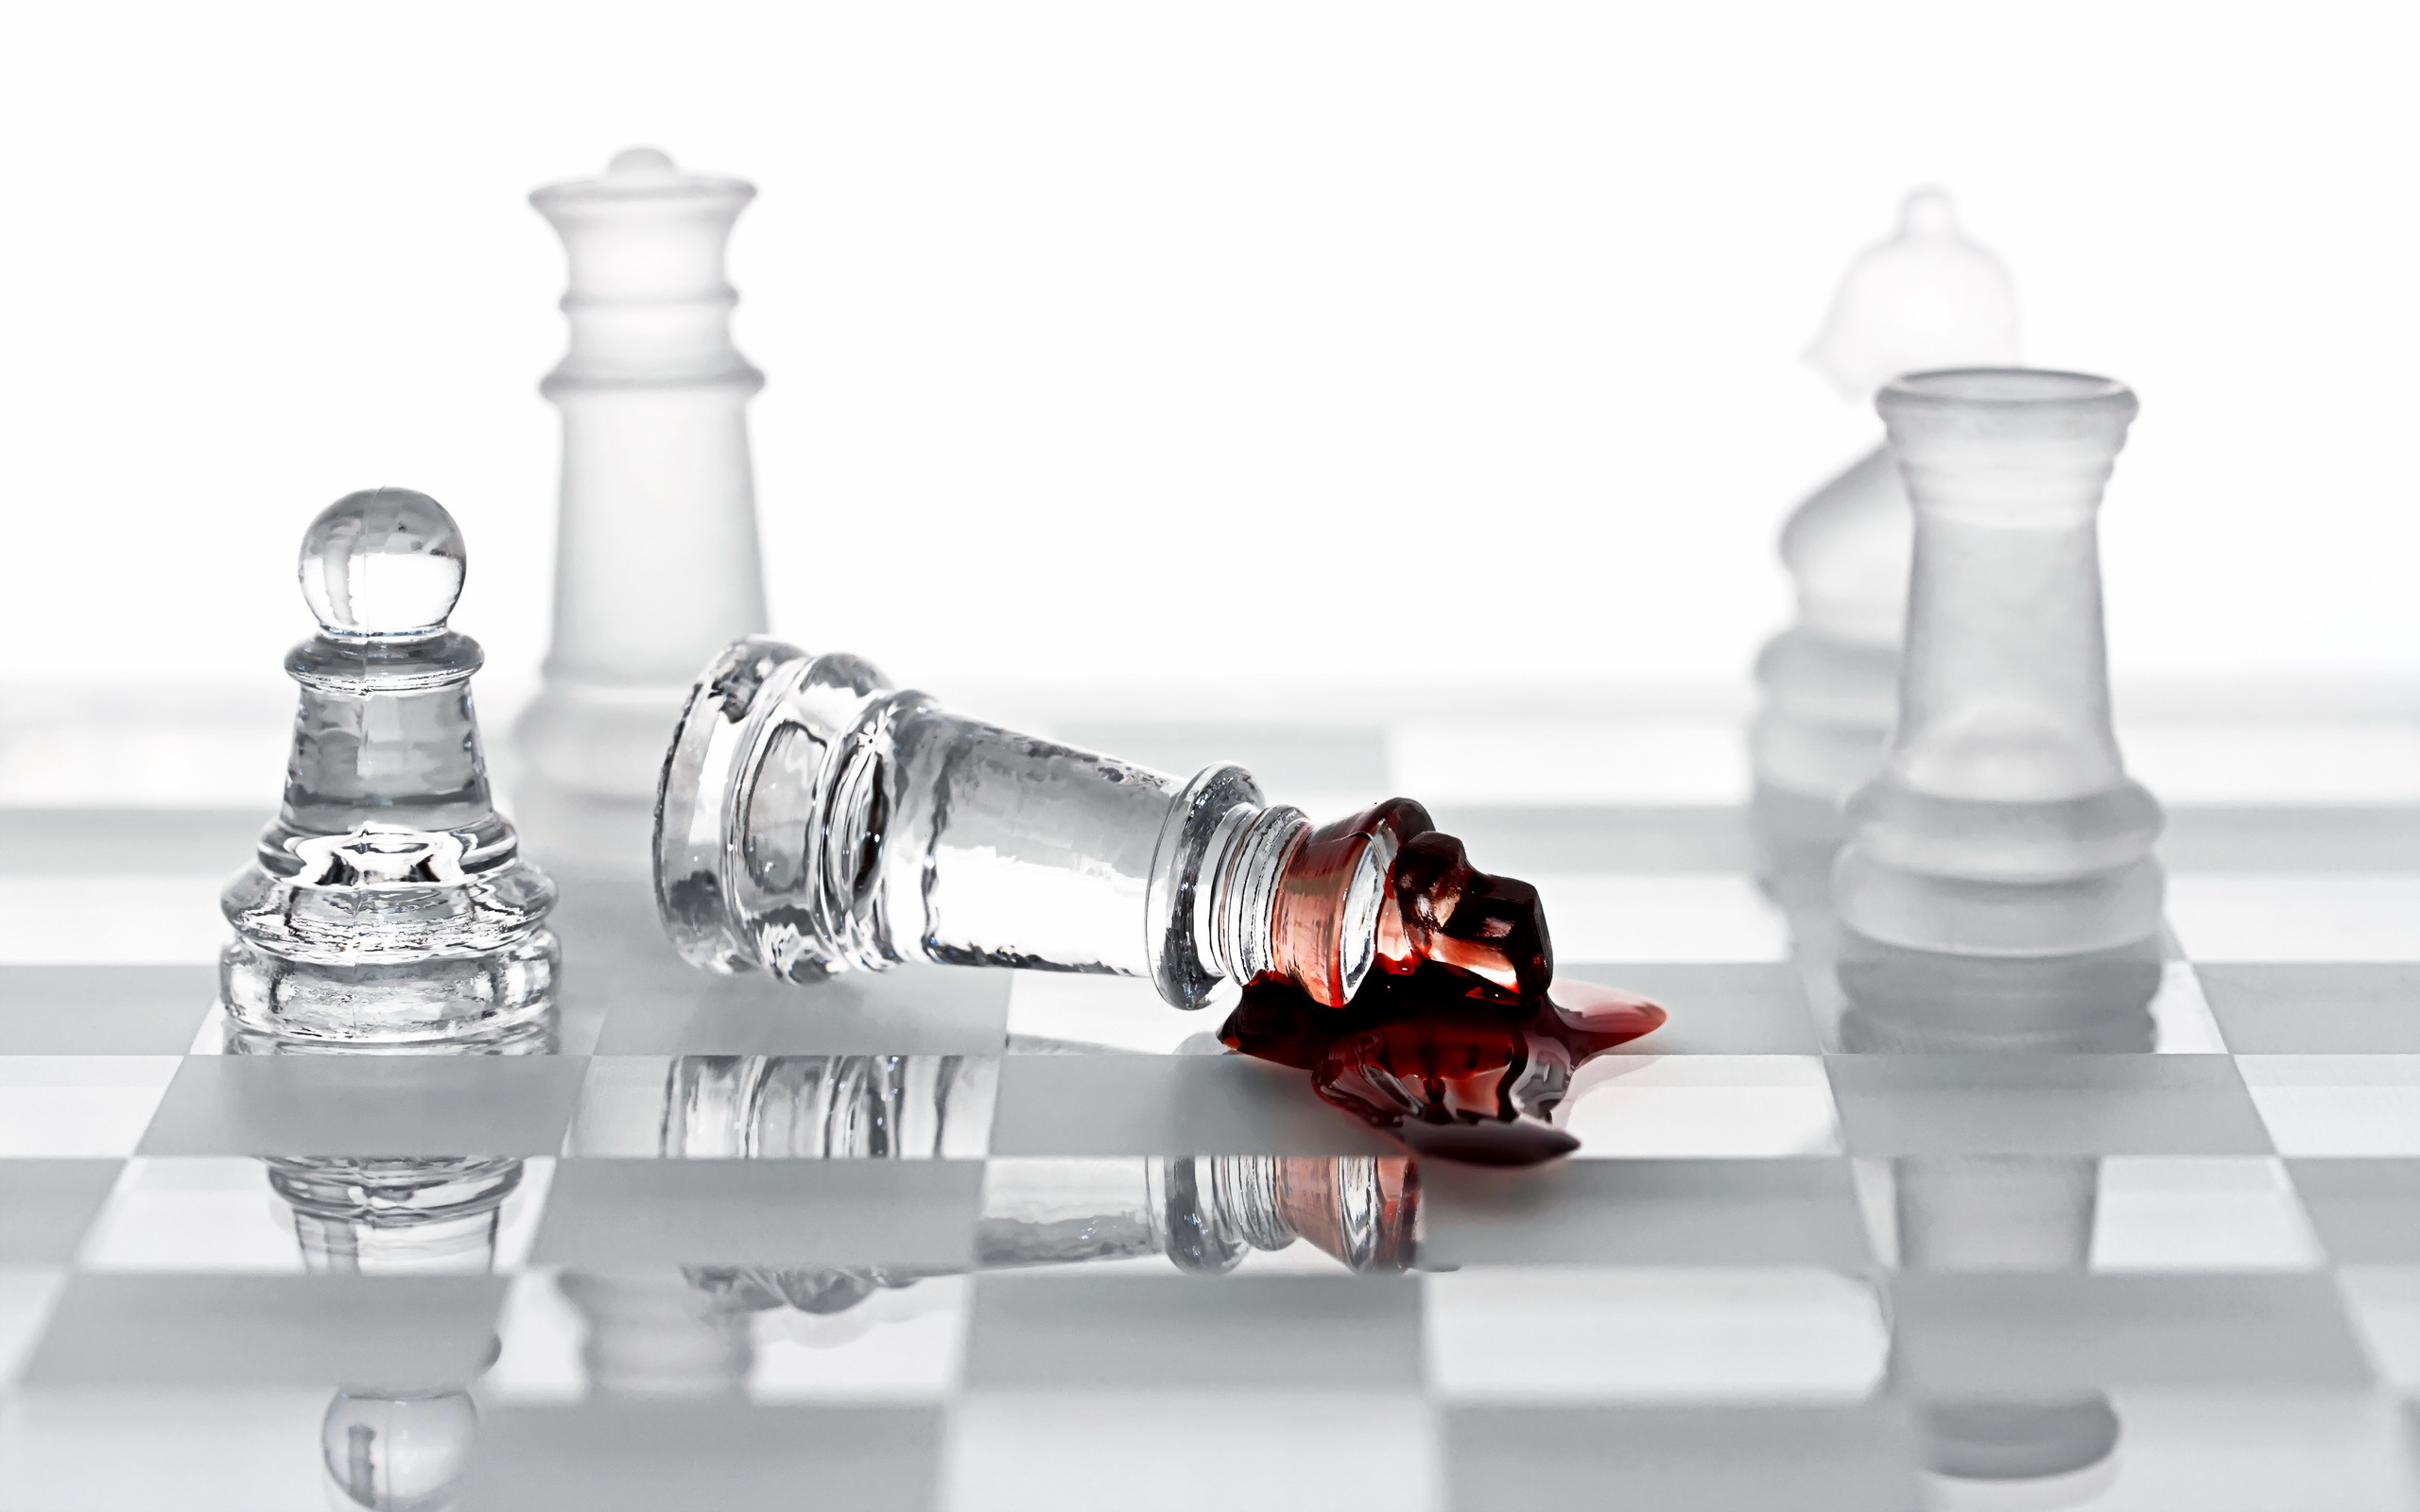 Chess Wallpapers 21 - [2560x1600]